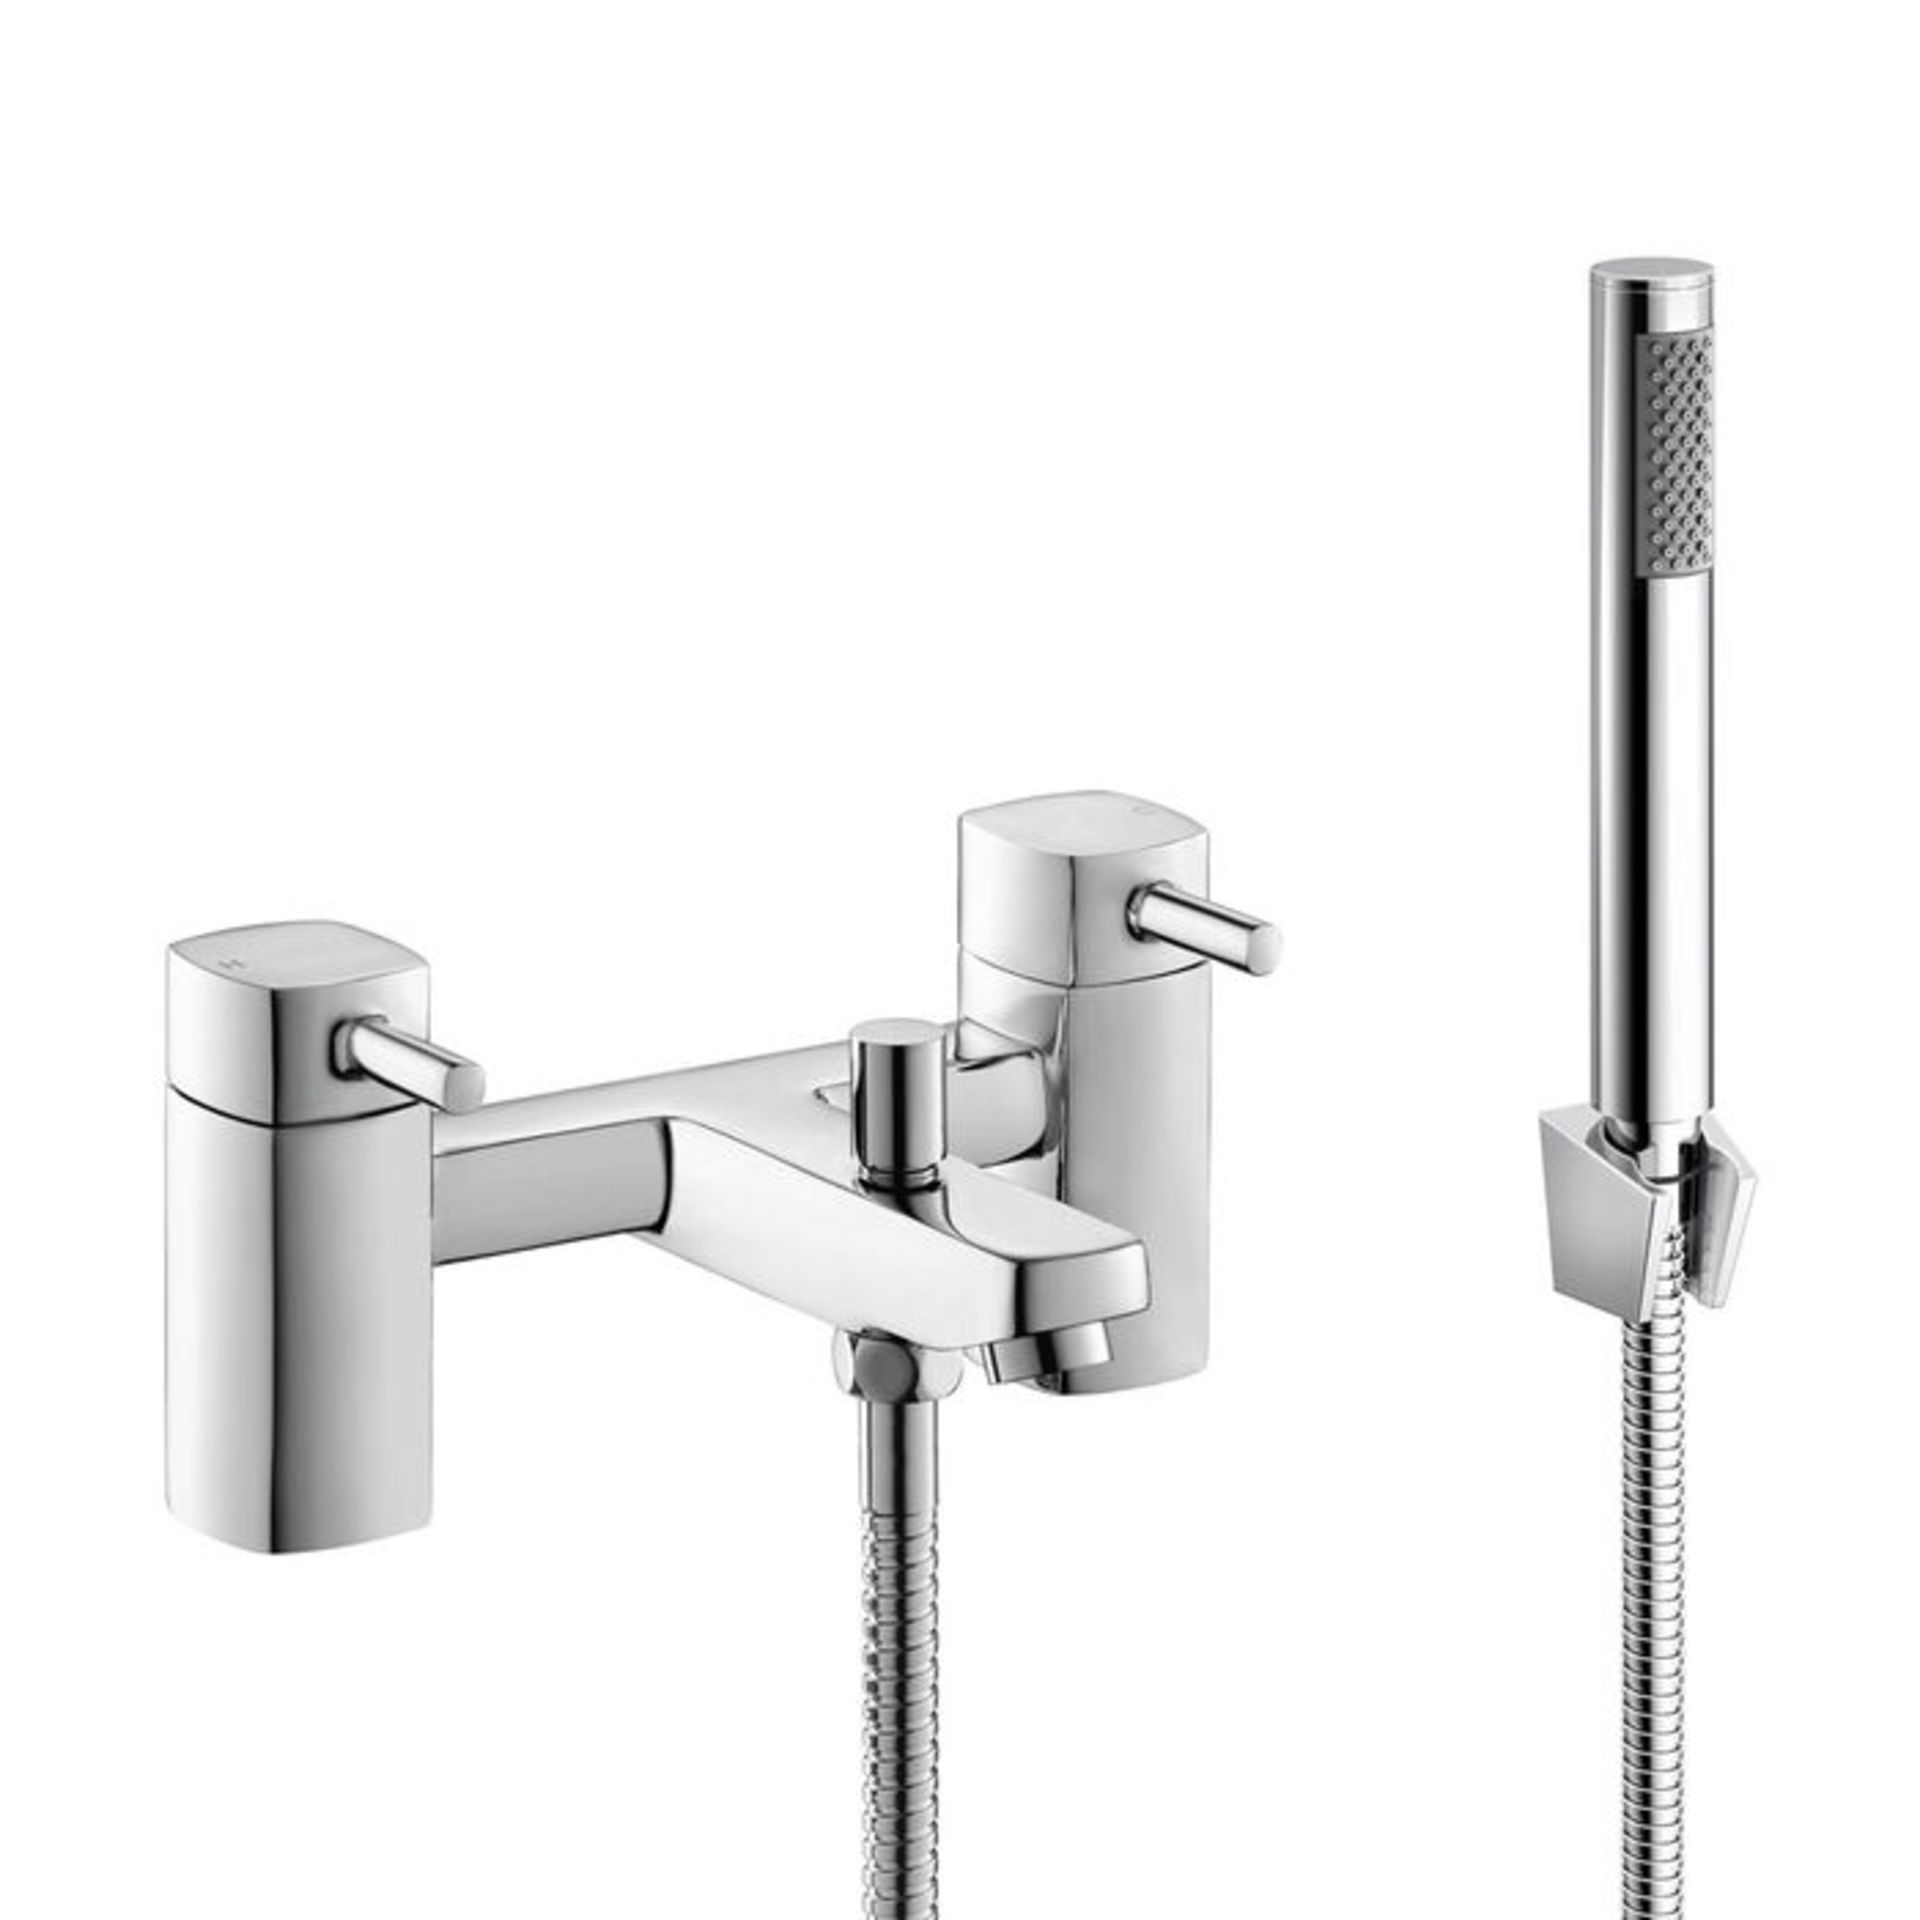 (SH1004) Avon Bath Mixer Tap & Handheld Shower Head. Chrome Plated Solid Brass 1/4 turn solid ... - Image 2 of 3